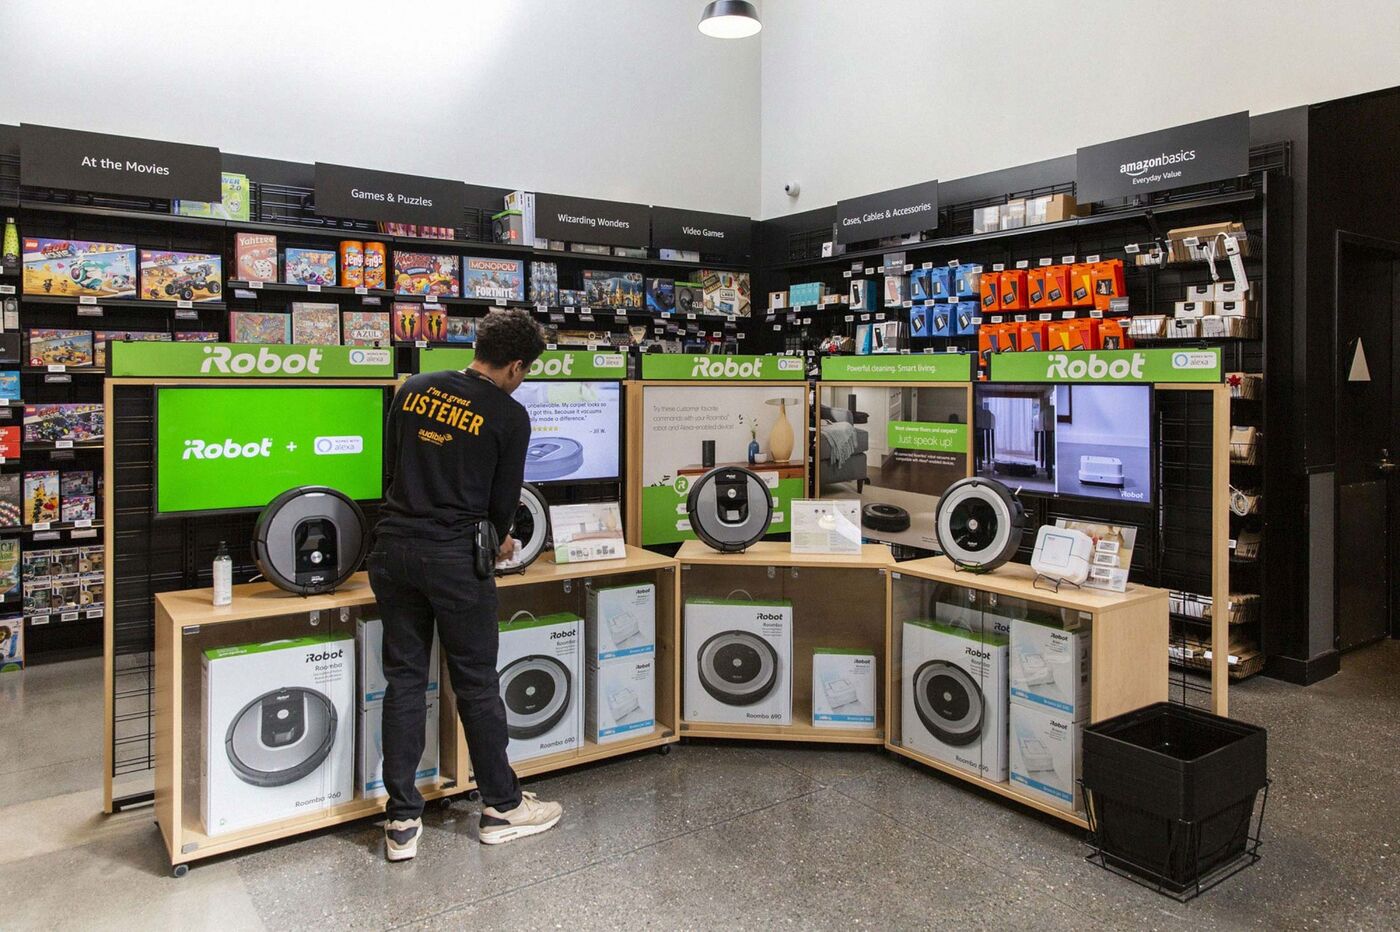 An employee cleans an iRobot Corp. Roomba display inside an Amazon.com Inc. 4-star store in Berkeley, Calif. on March 29, 2019.